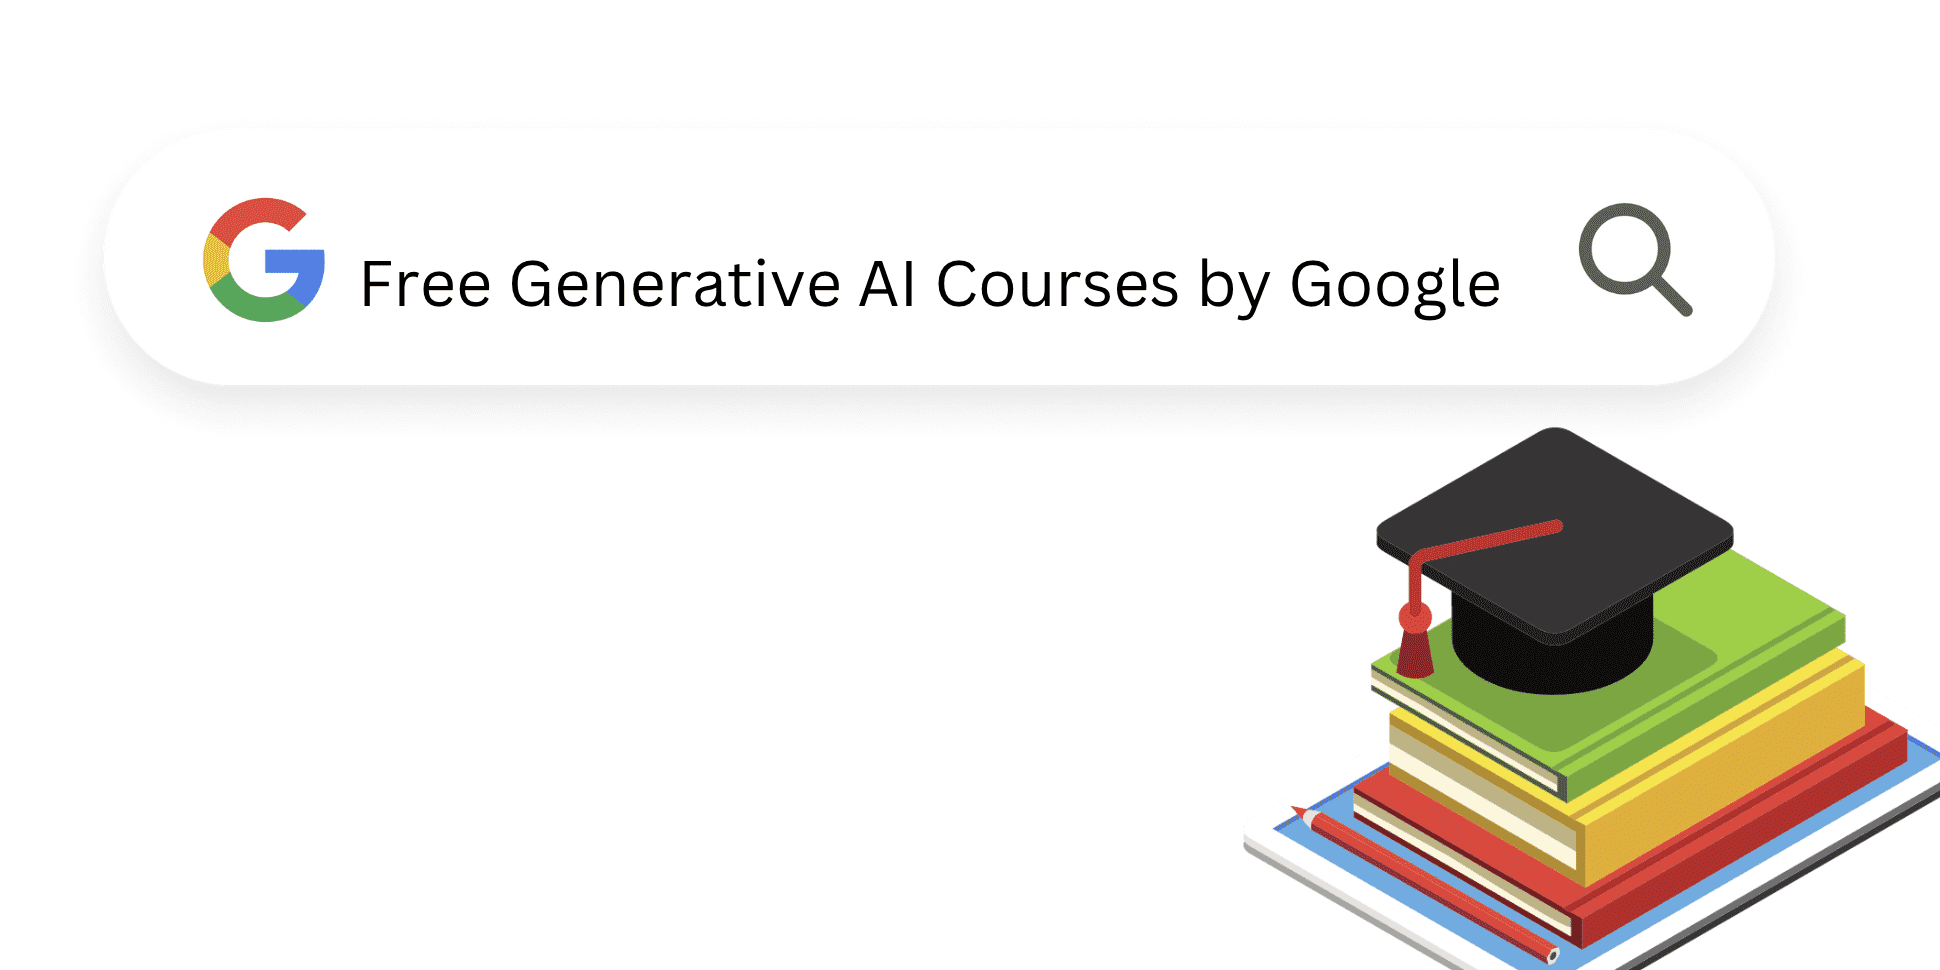 Free Generative AI Courses by Google